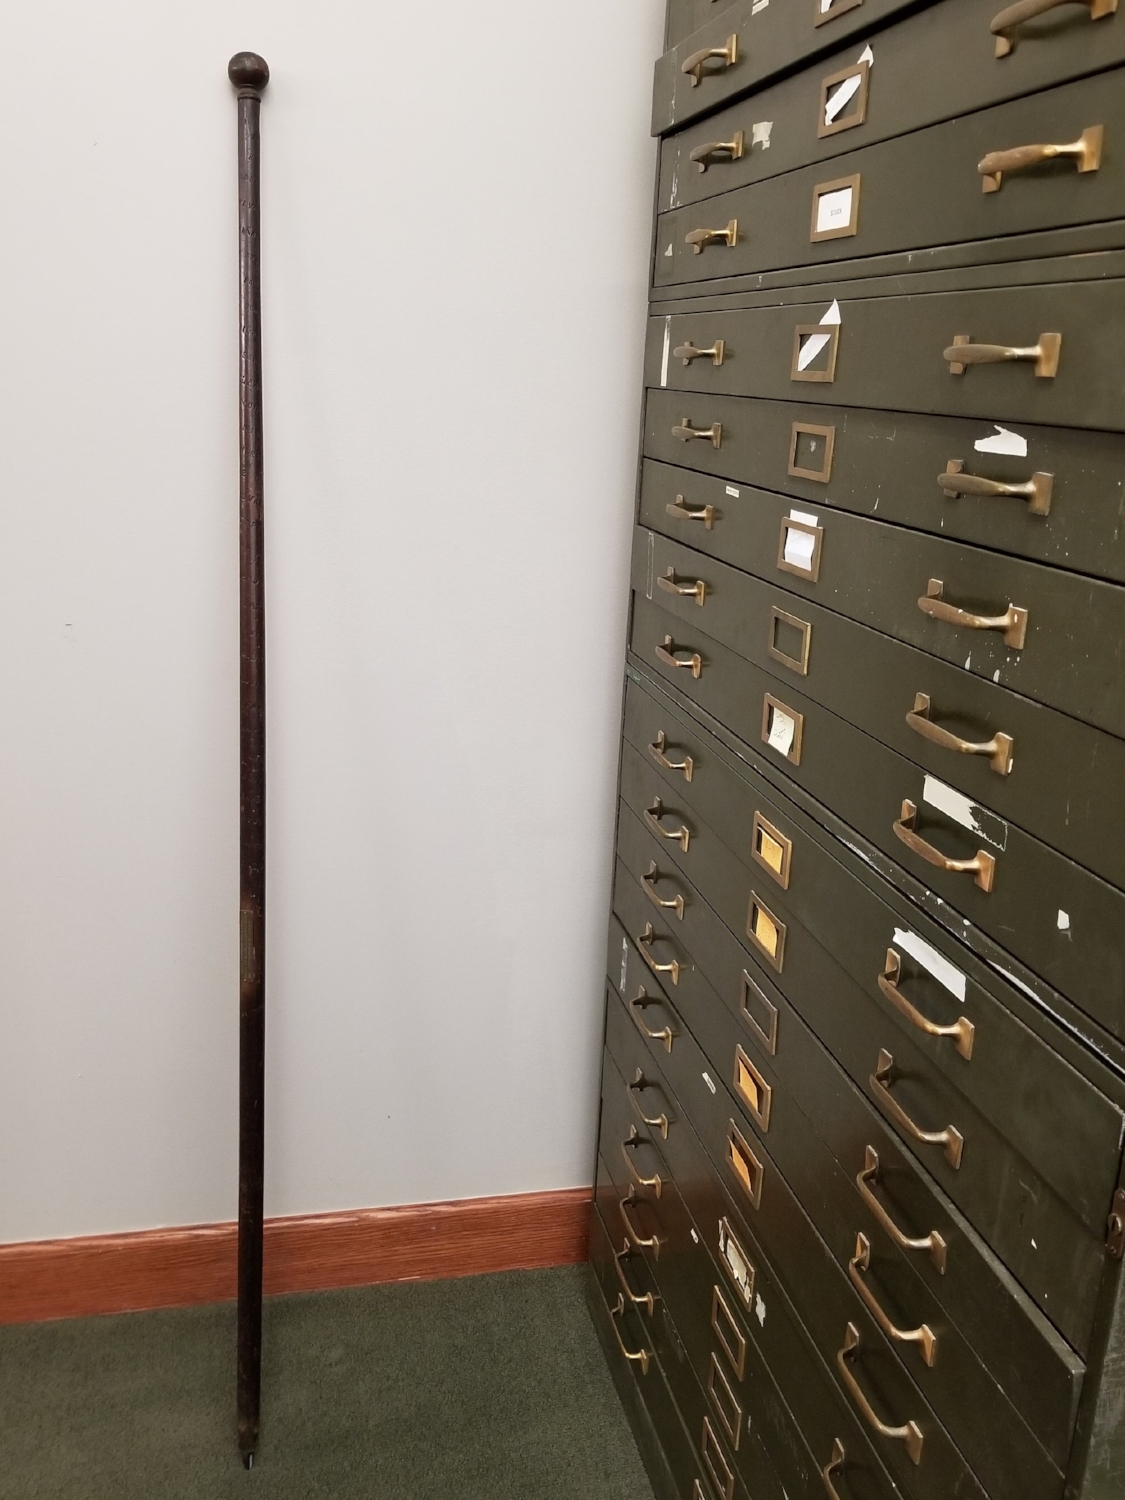  This alpenstock is of the oldest variety. It stands about five and a half feet tall and has a sharp metal spike at the bottom. 